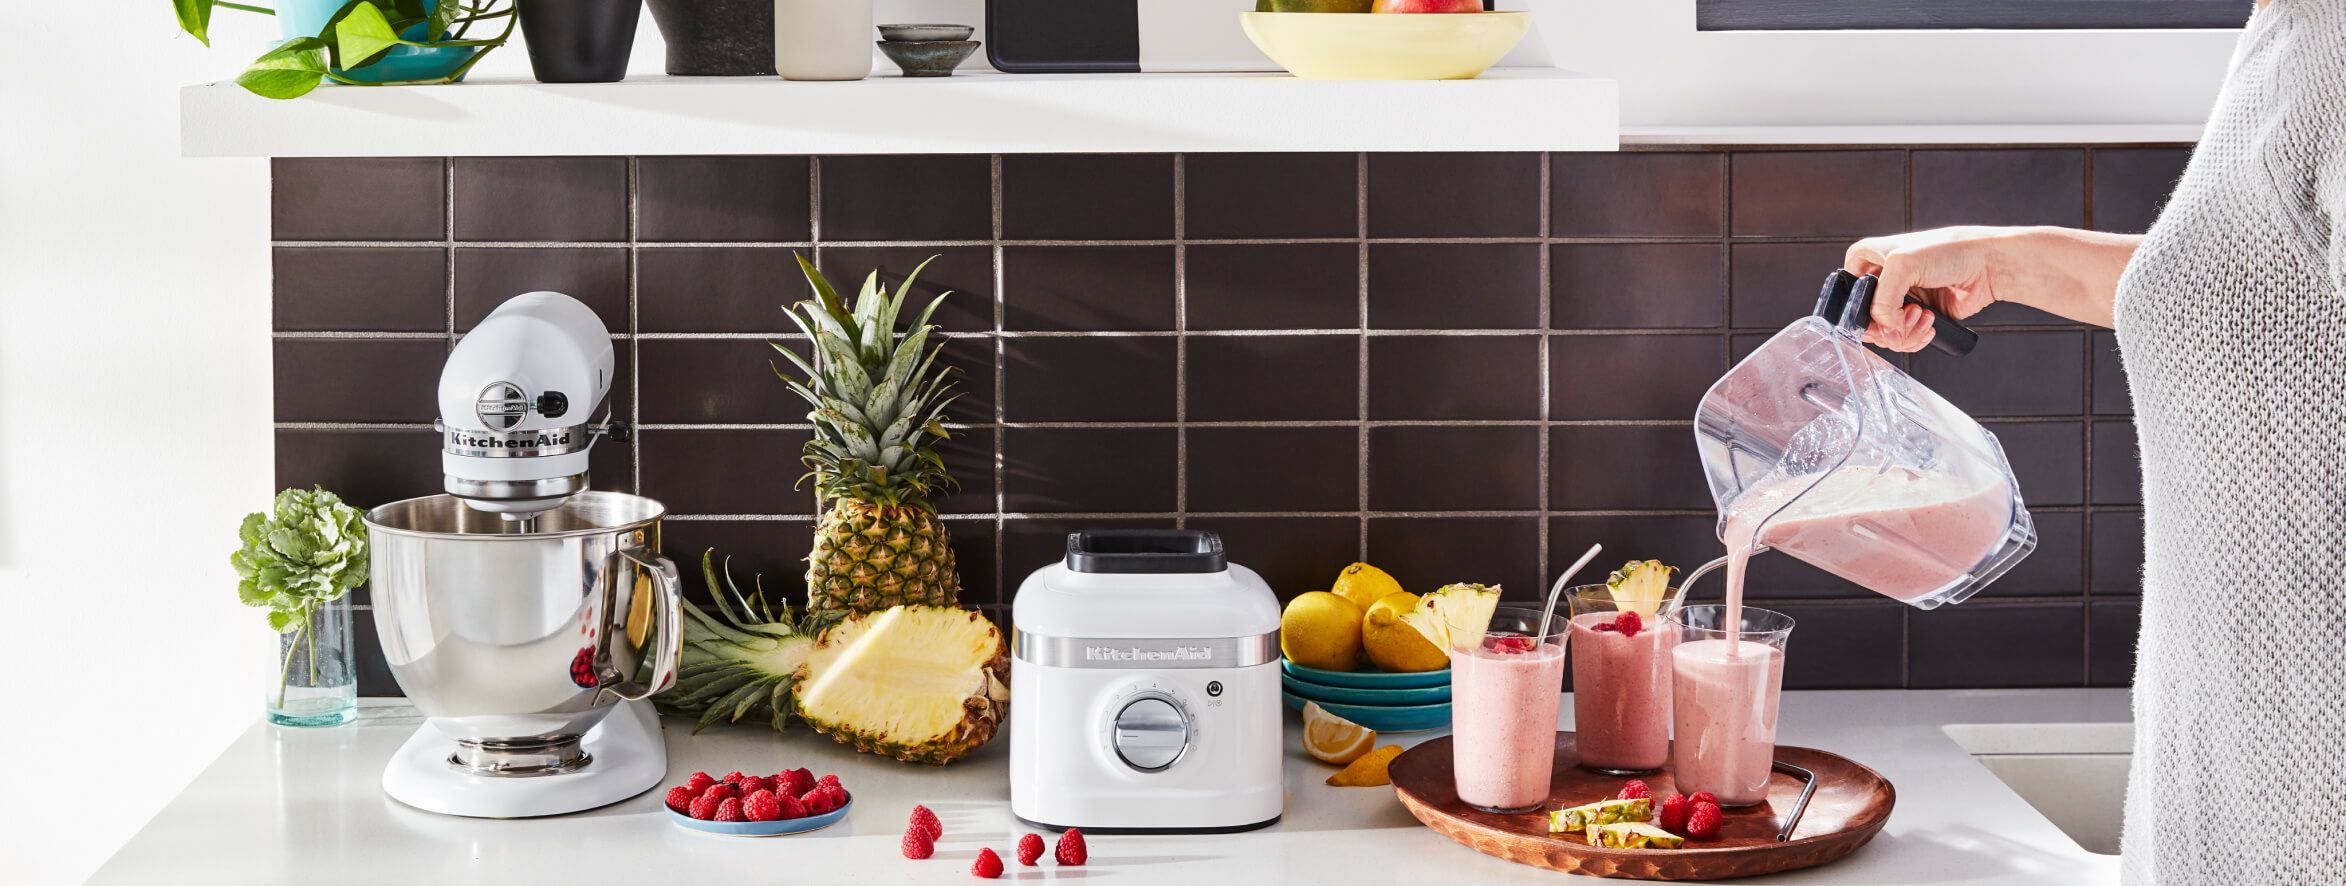  White countertop with KitchenAid® stand mixer and KitchenAid® blender surrounded by fruits - woman is pouring smoothies into three glasses.